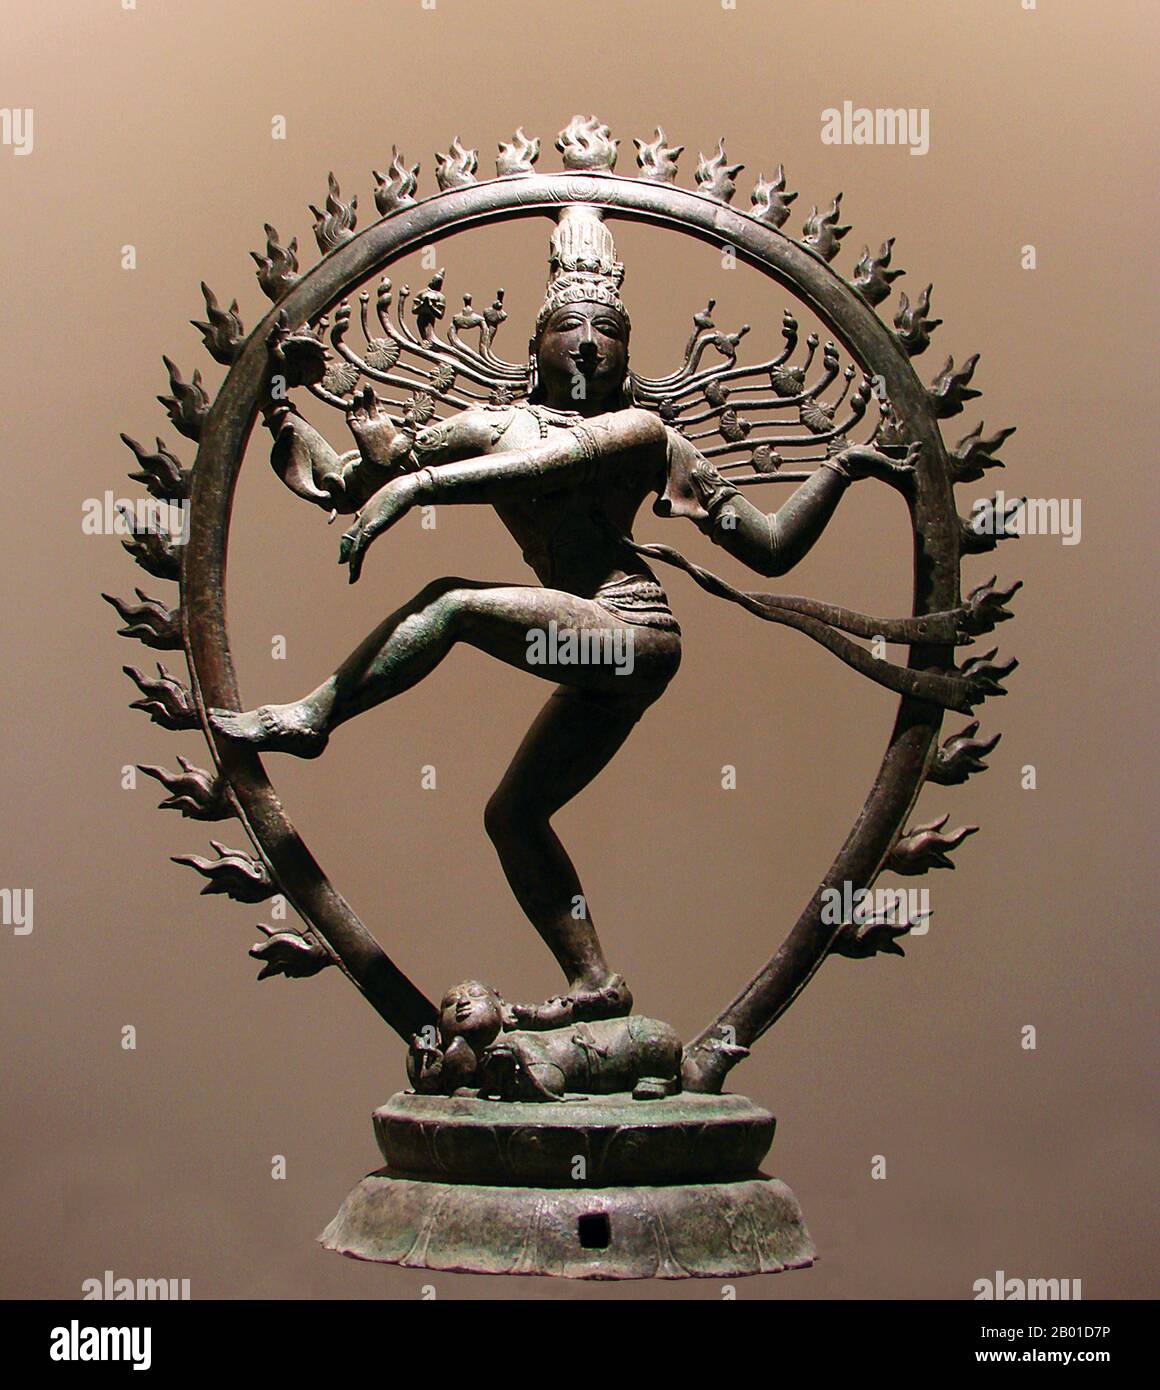 India: Shiva Nataraja or 'Dancing Shiva'. Bronze statuette from Tamil Nadu, Chola Dynasty, c. 11th century.  Nataraja or Nataraj ('The Lord (or King) of Dance'; Tamil: Kooththan) is a depiction of the Hindu god Shiva as the cosmic dancer Koothan who performs his divine dance to destroy a weary universe and make preparations for god Brahma to start the process of creation.  A Tamil concept, Shiva was first depicted as Nataraja in the famous Chola bronzes and sculptures of Chidambaram. Stock Photo